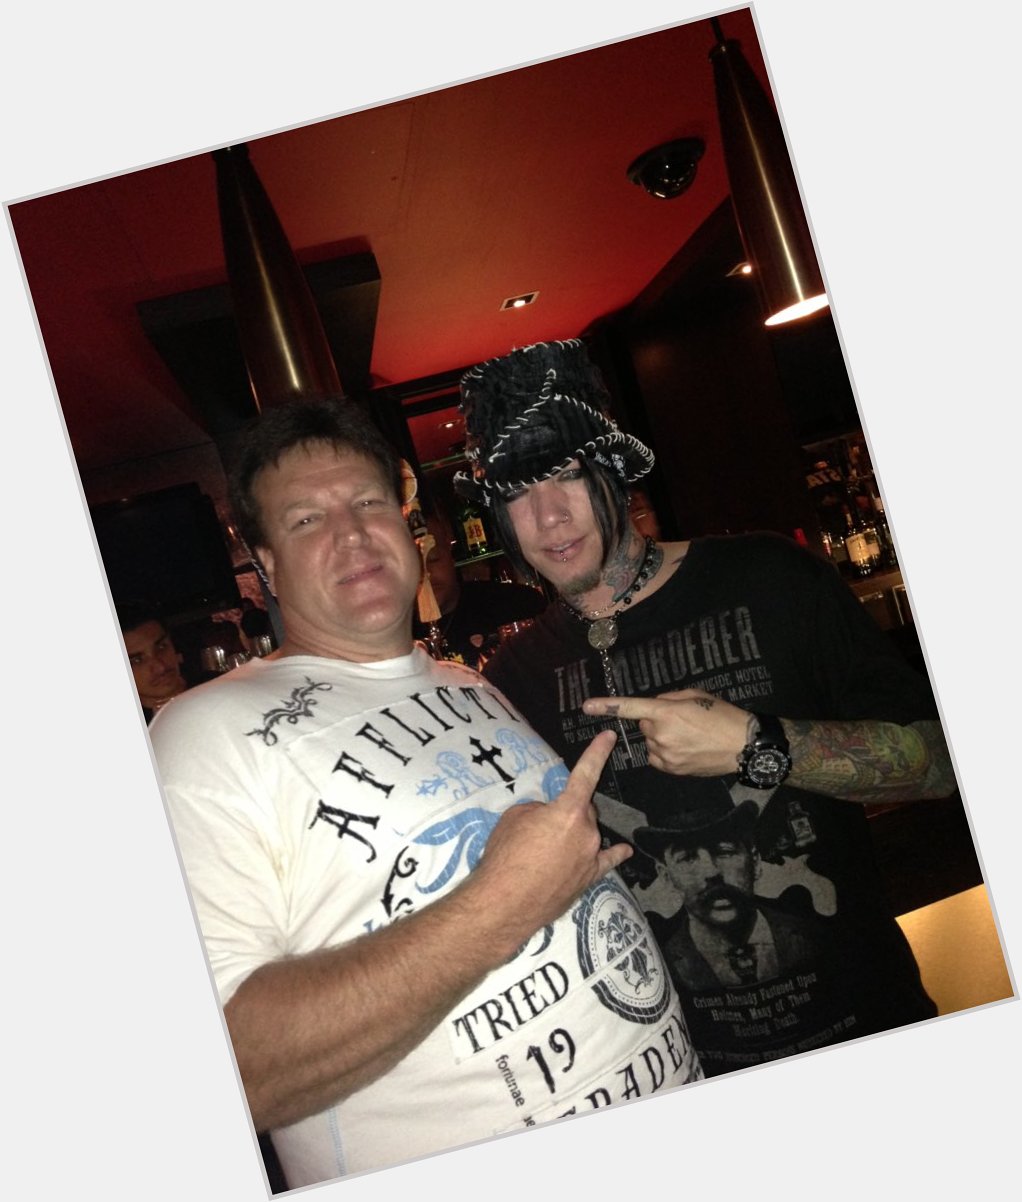  Happy bday DJ Ashba. It awesome meeting u at The joint when Def Leppard was there. Thanks for being cool 